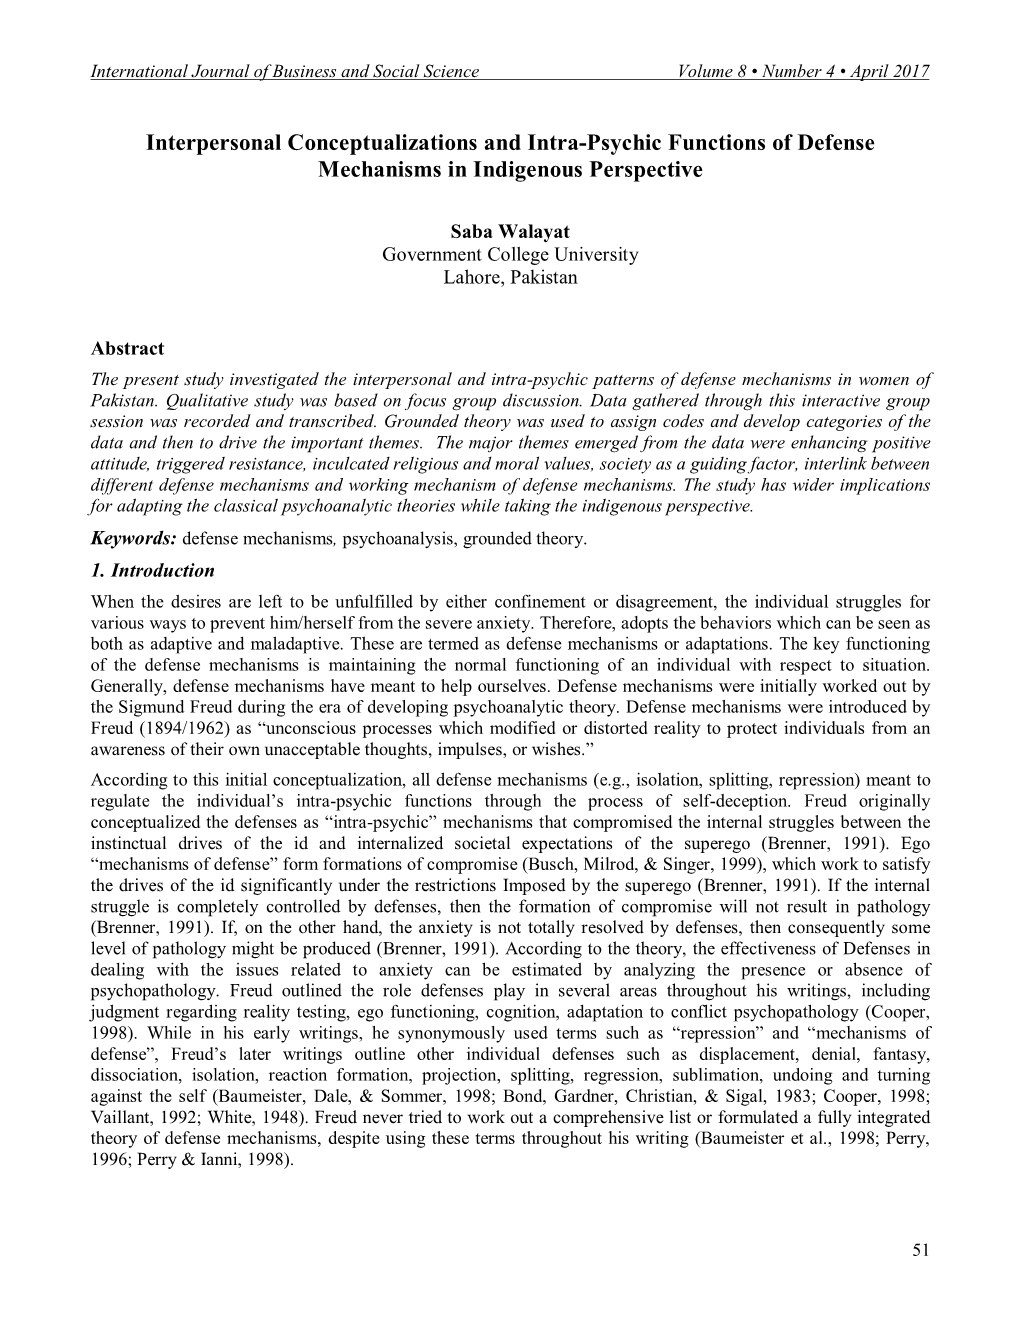 Interpersonal Conceptualizations and Intra-Psychic Functions of Defense Mechanisms in Indigenous Perspective